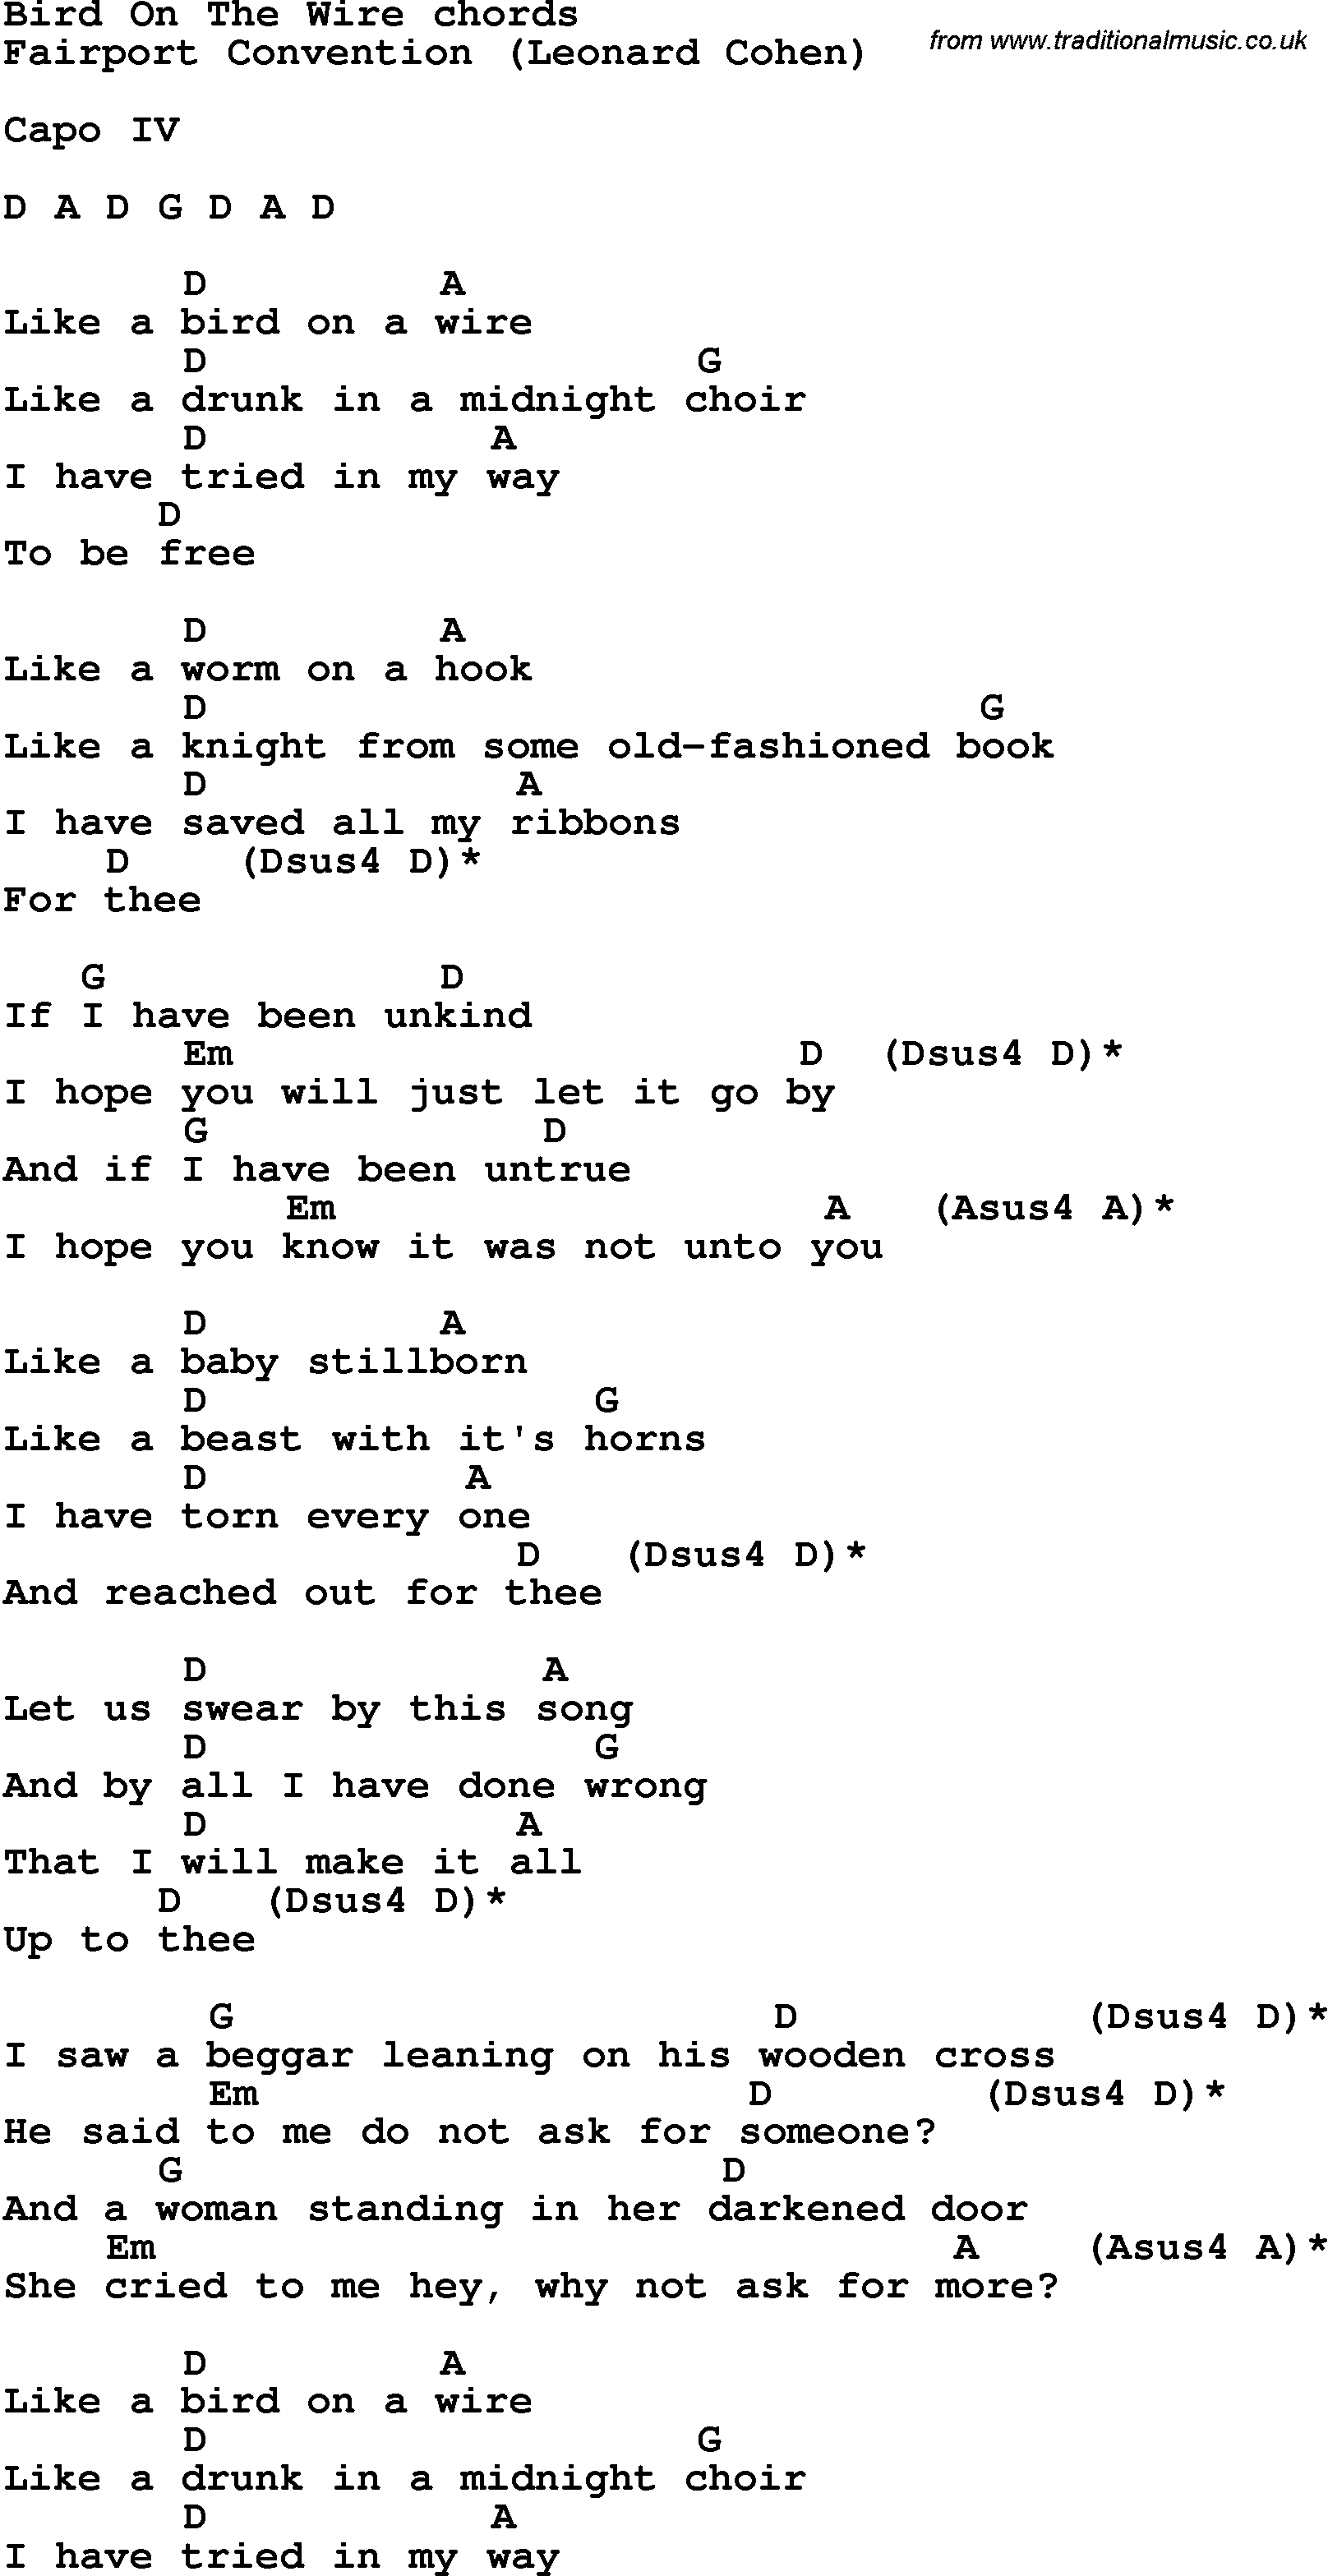 Song Lyrics with guitar chords for Bird On The Wire